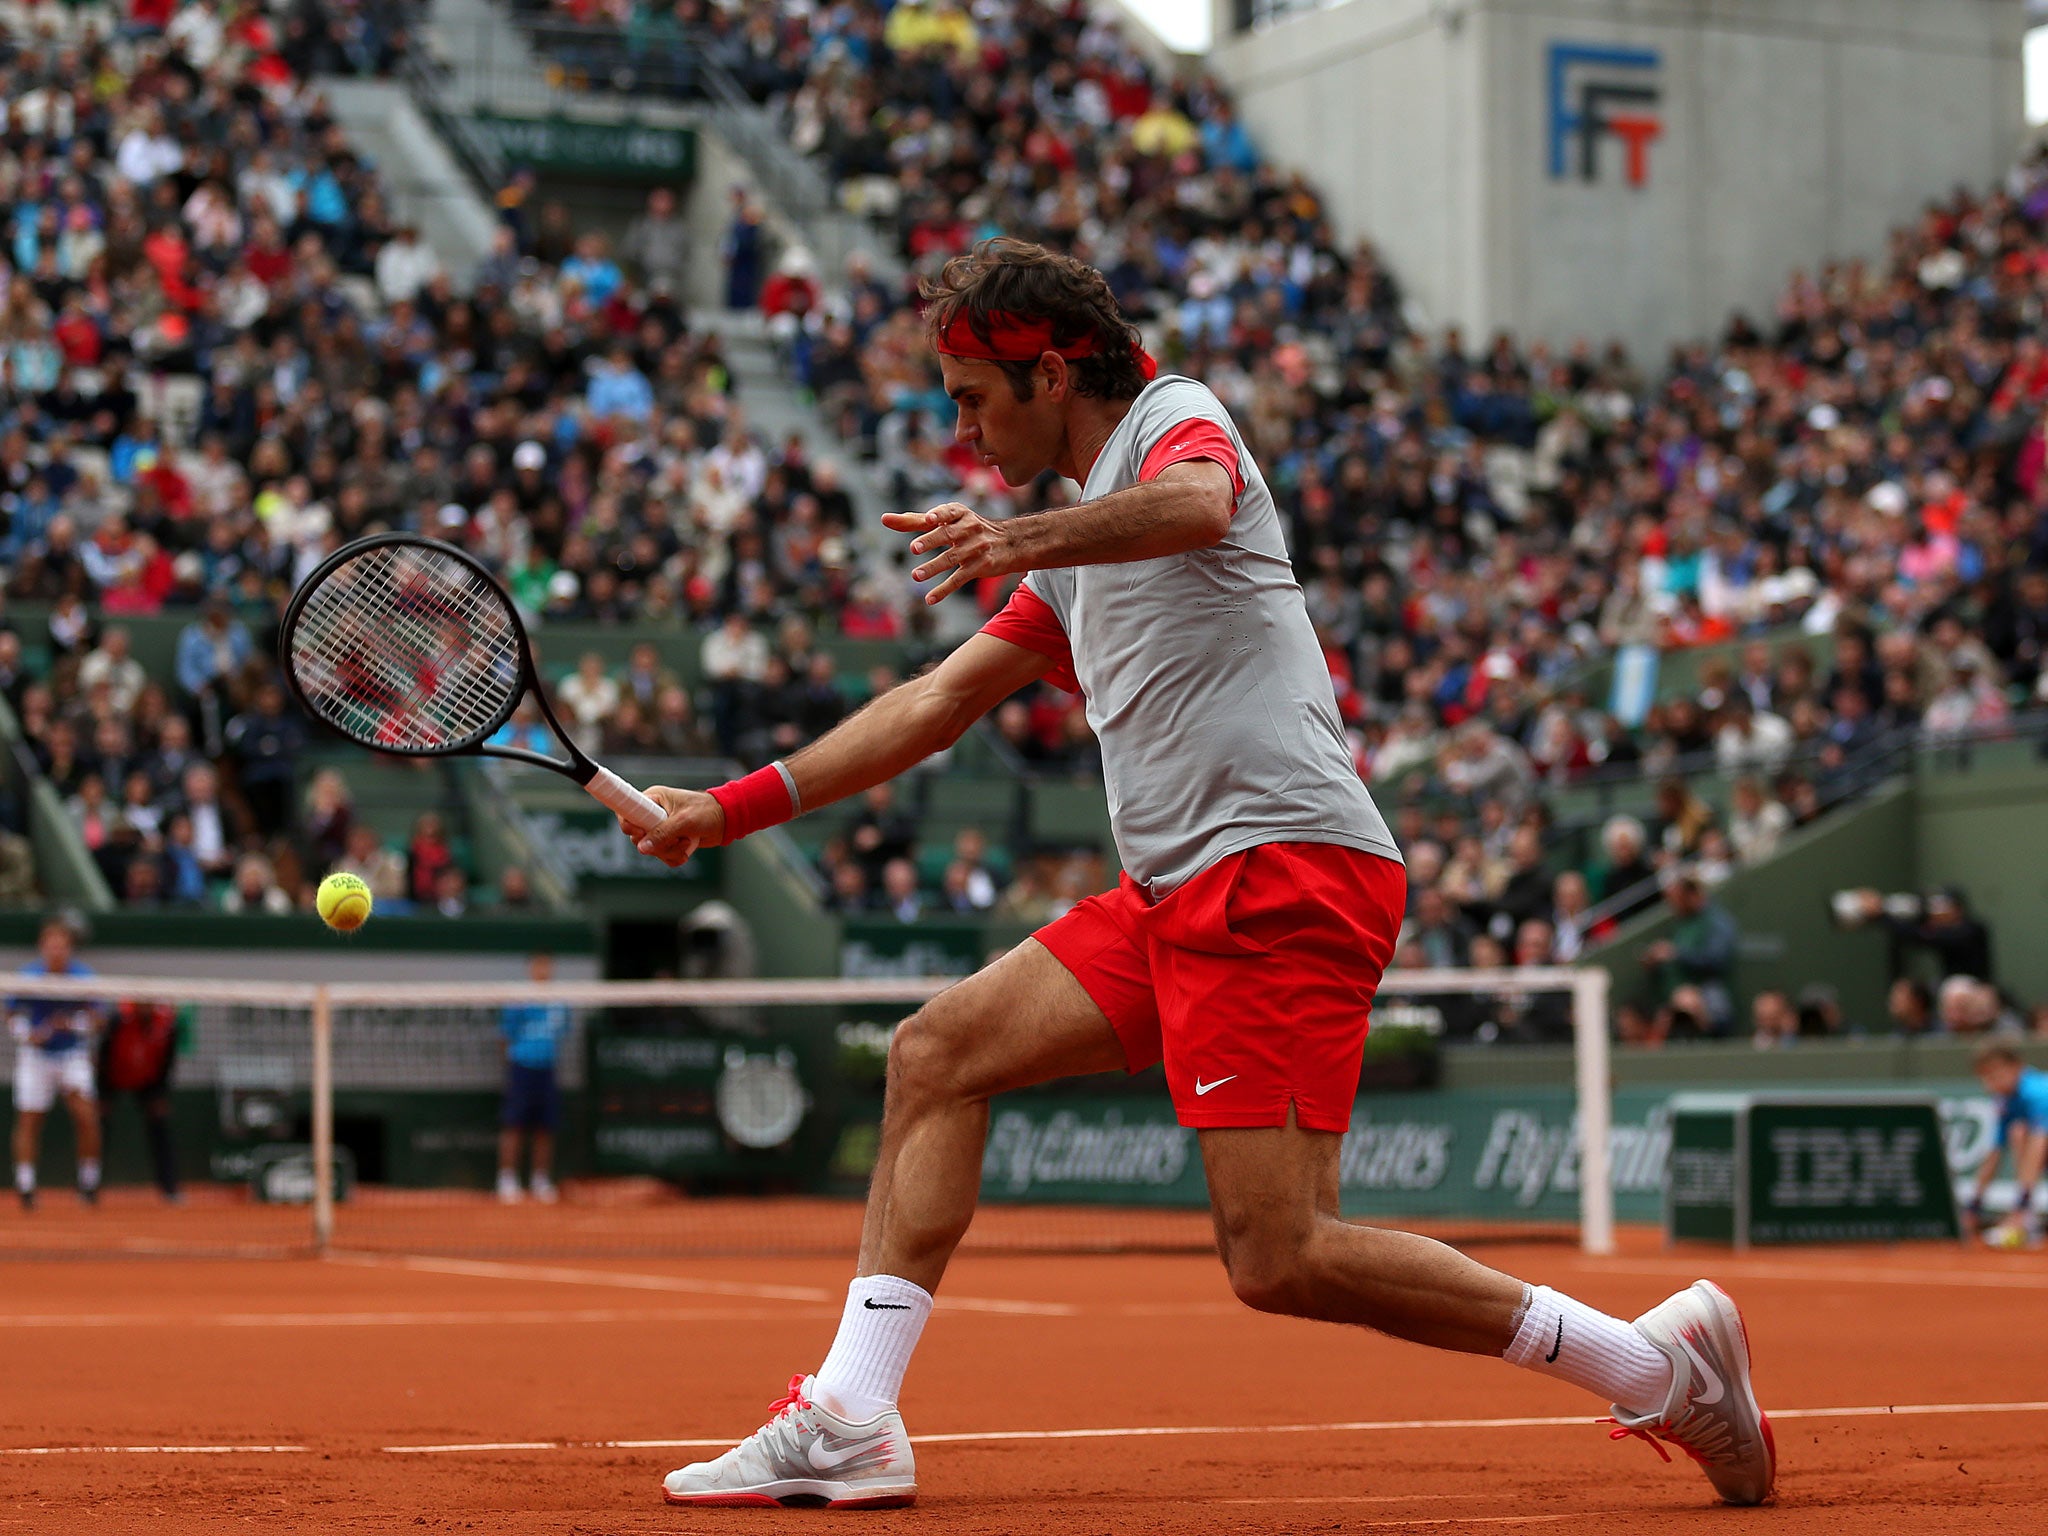 Roger Federer of Switzerland returns a shot during his men's singles match against Diego Sebastian Schwartzman of Argentina on day four of the French Open